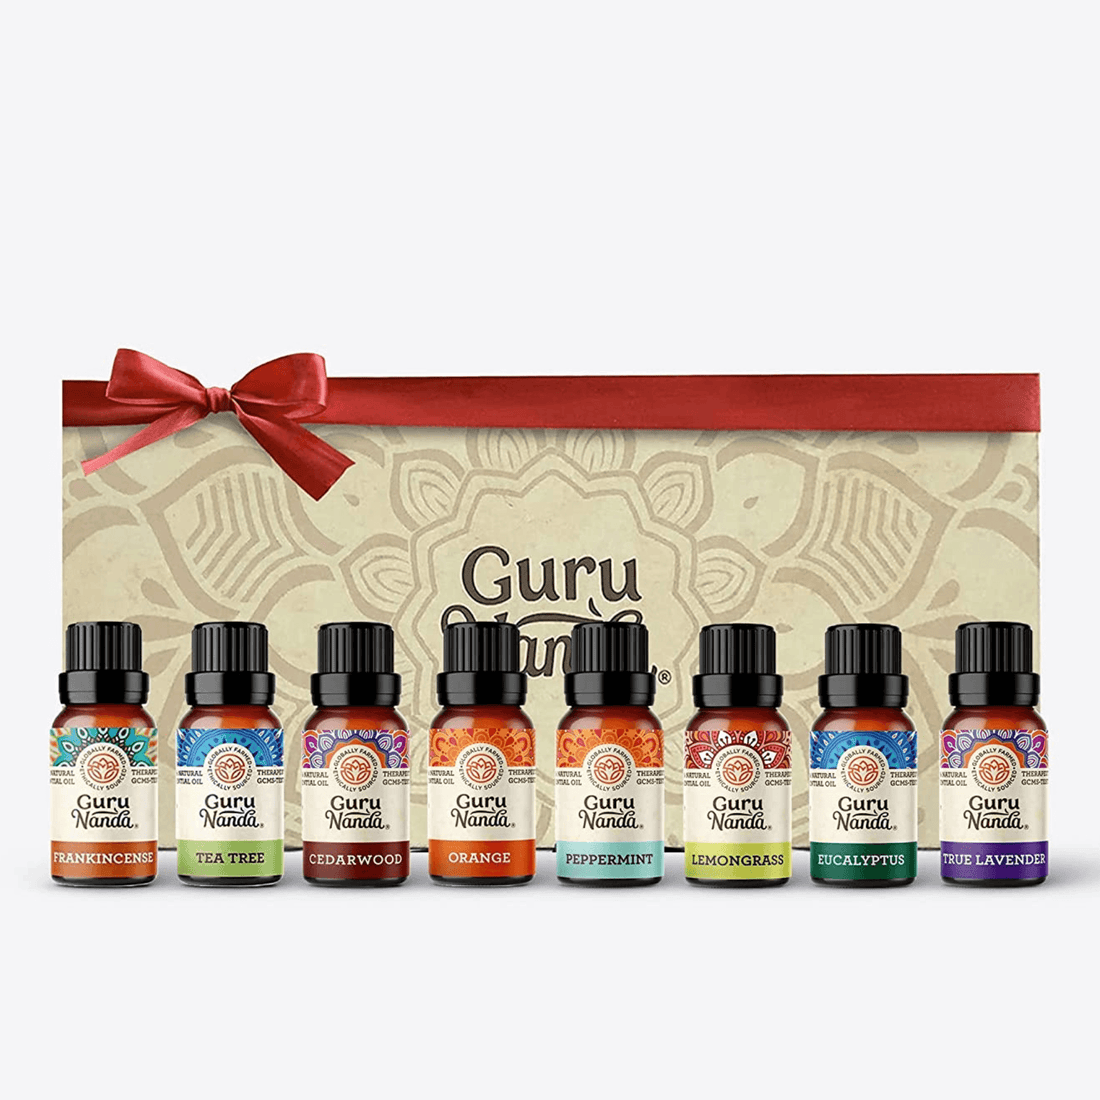 Obsessed with @Guru Nanda essential oil kit and diffuser. We